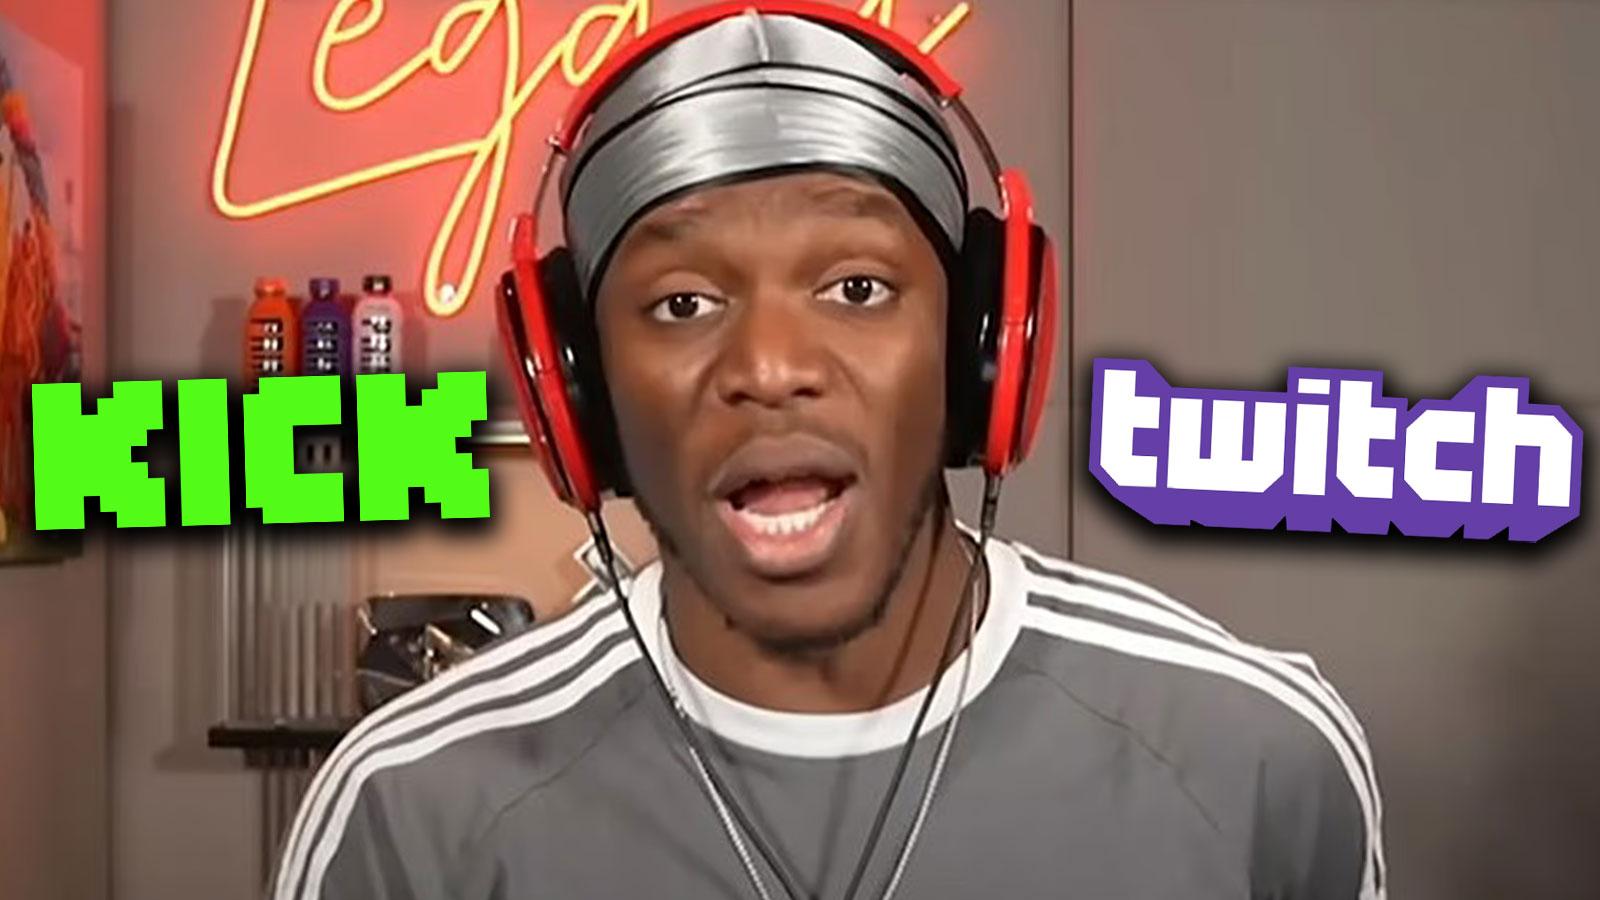 KSI with Kick and Twitch logos on each side